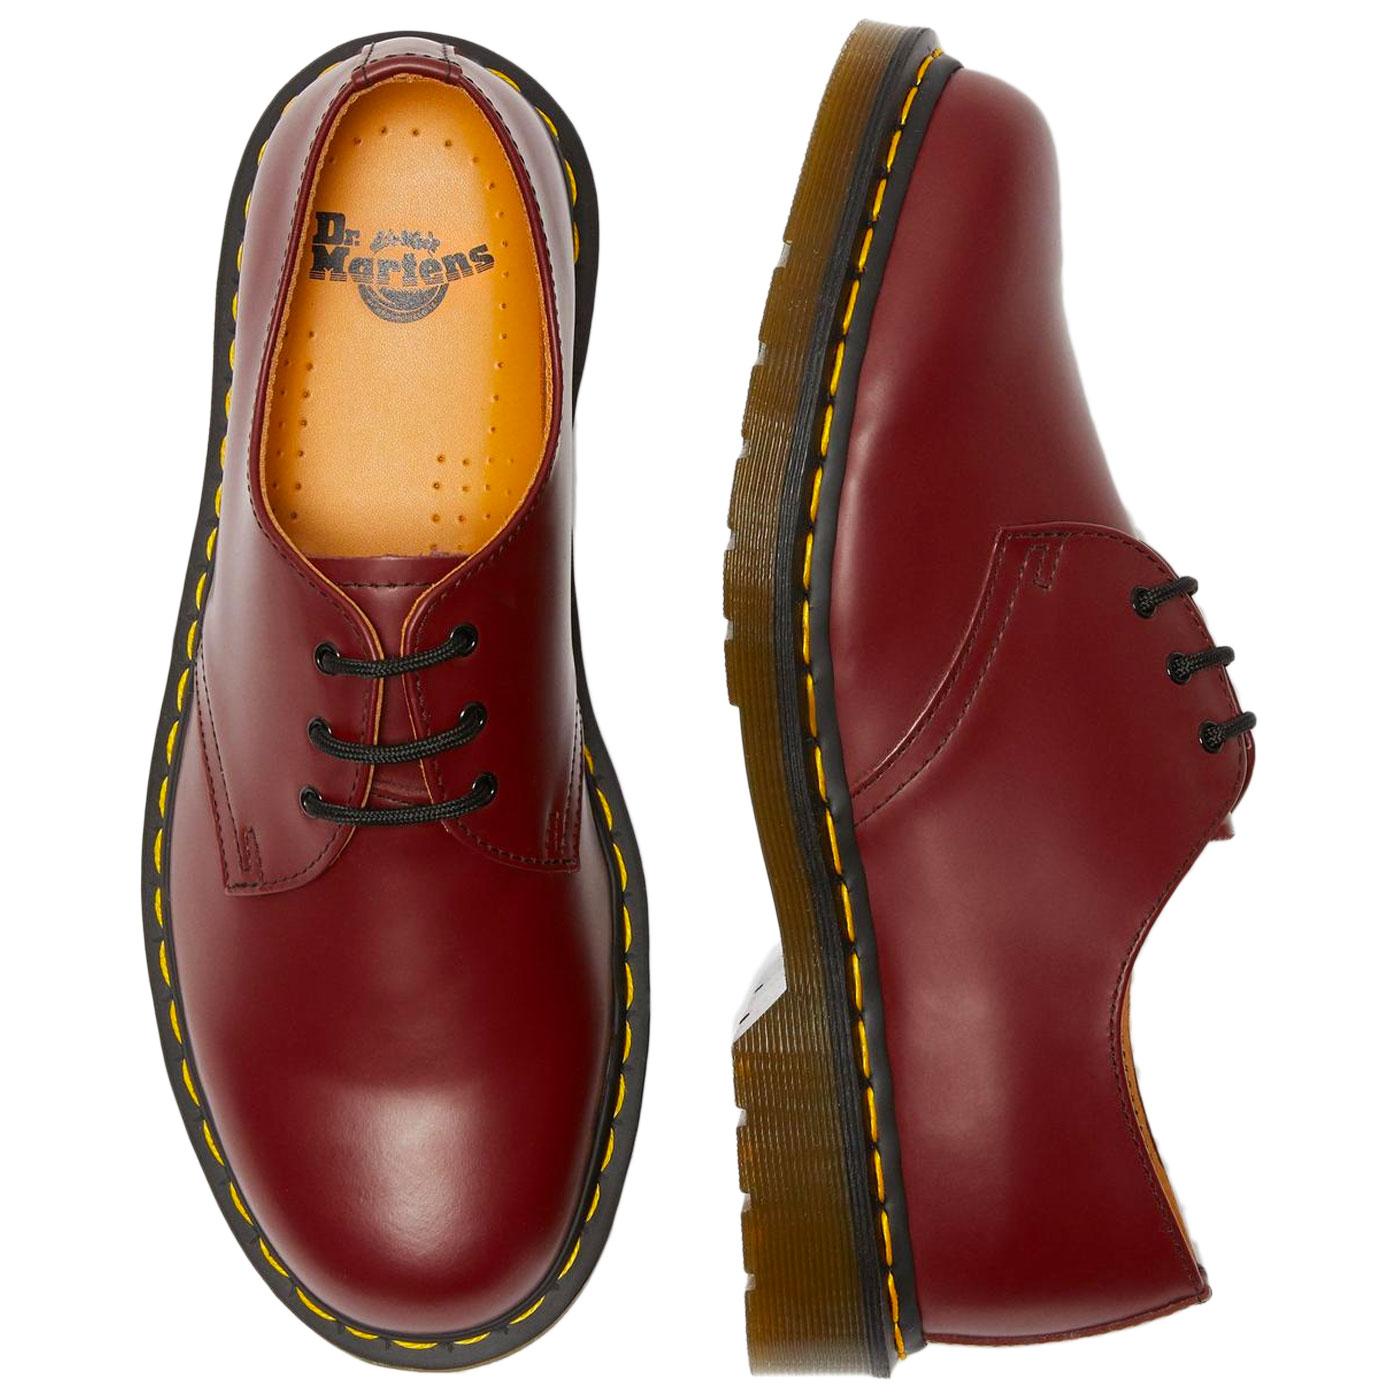 DR MARTENS 1461 Women's Smooth Shoes CHERRY RED